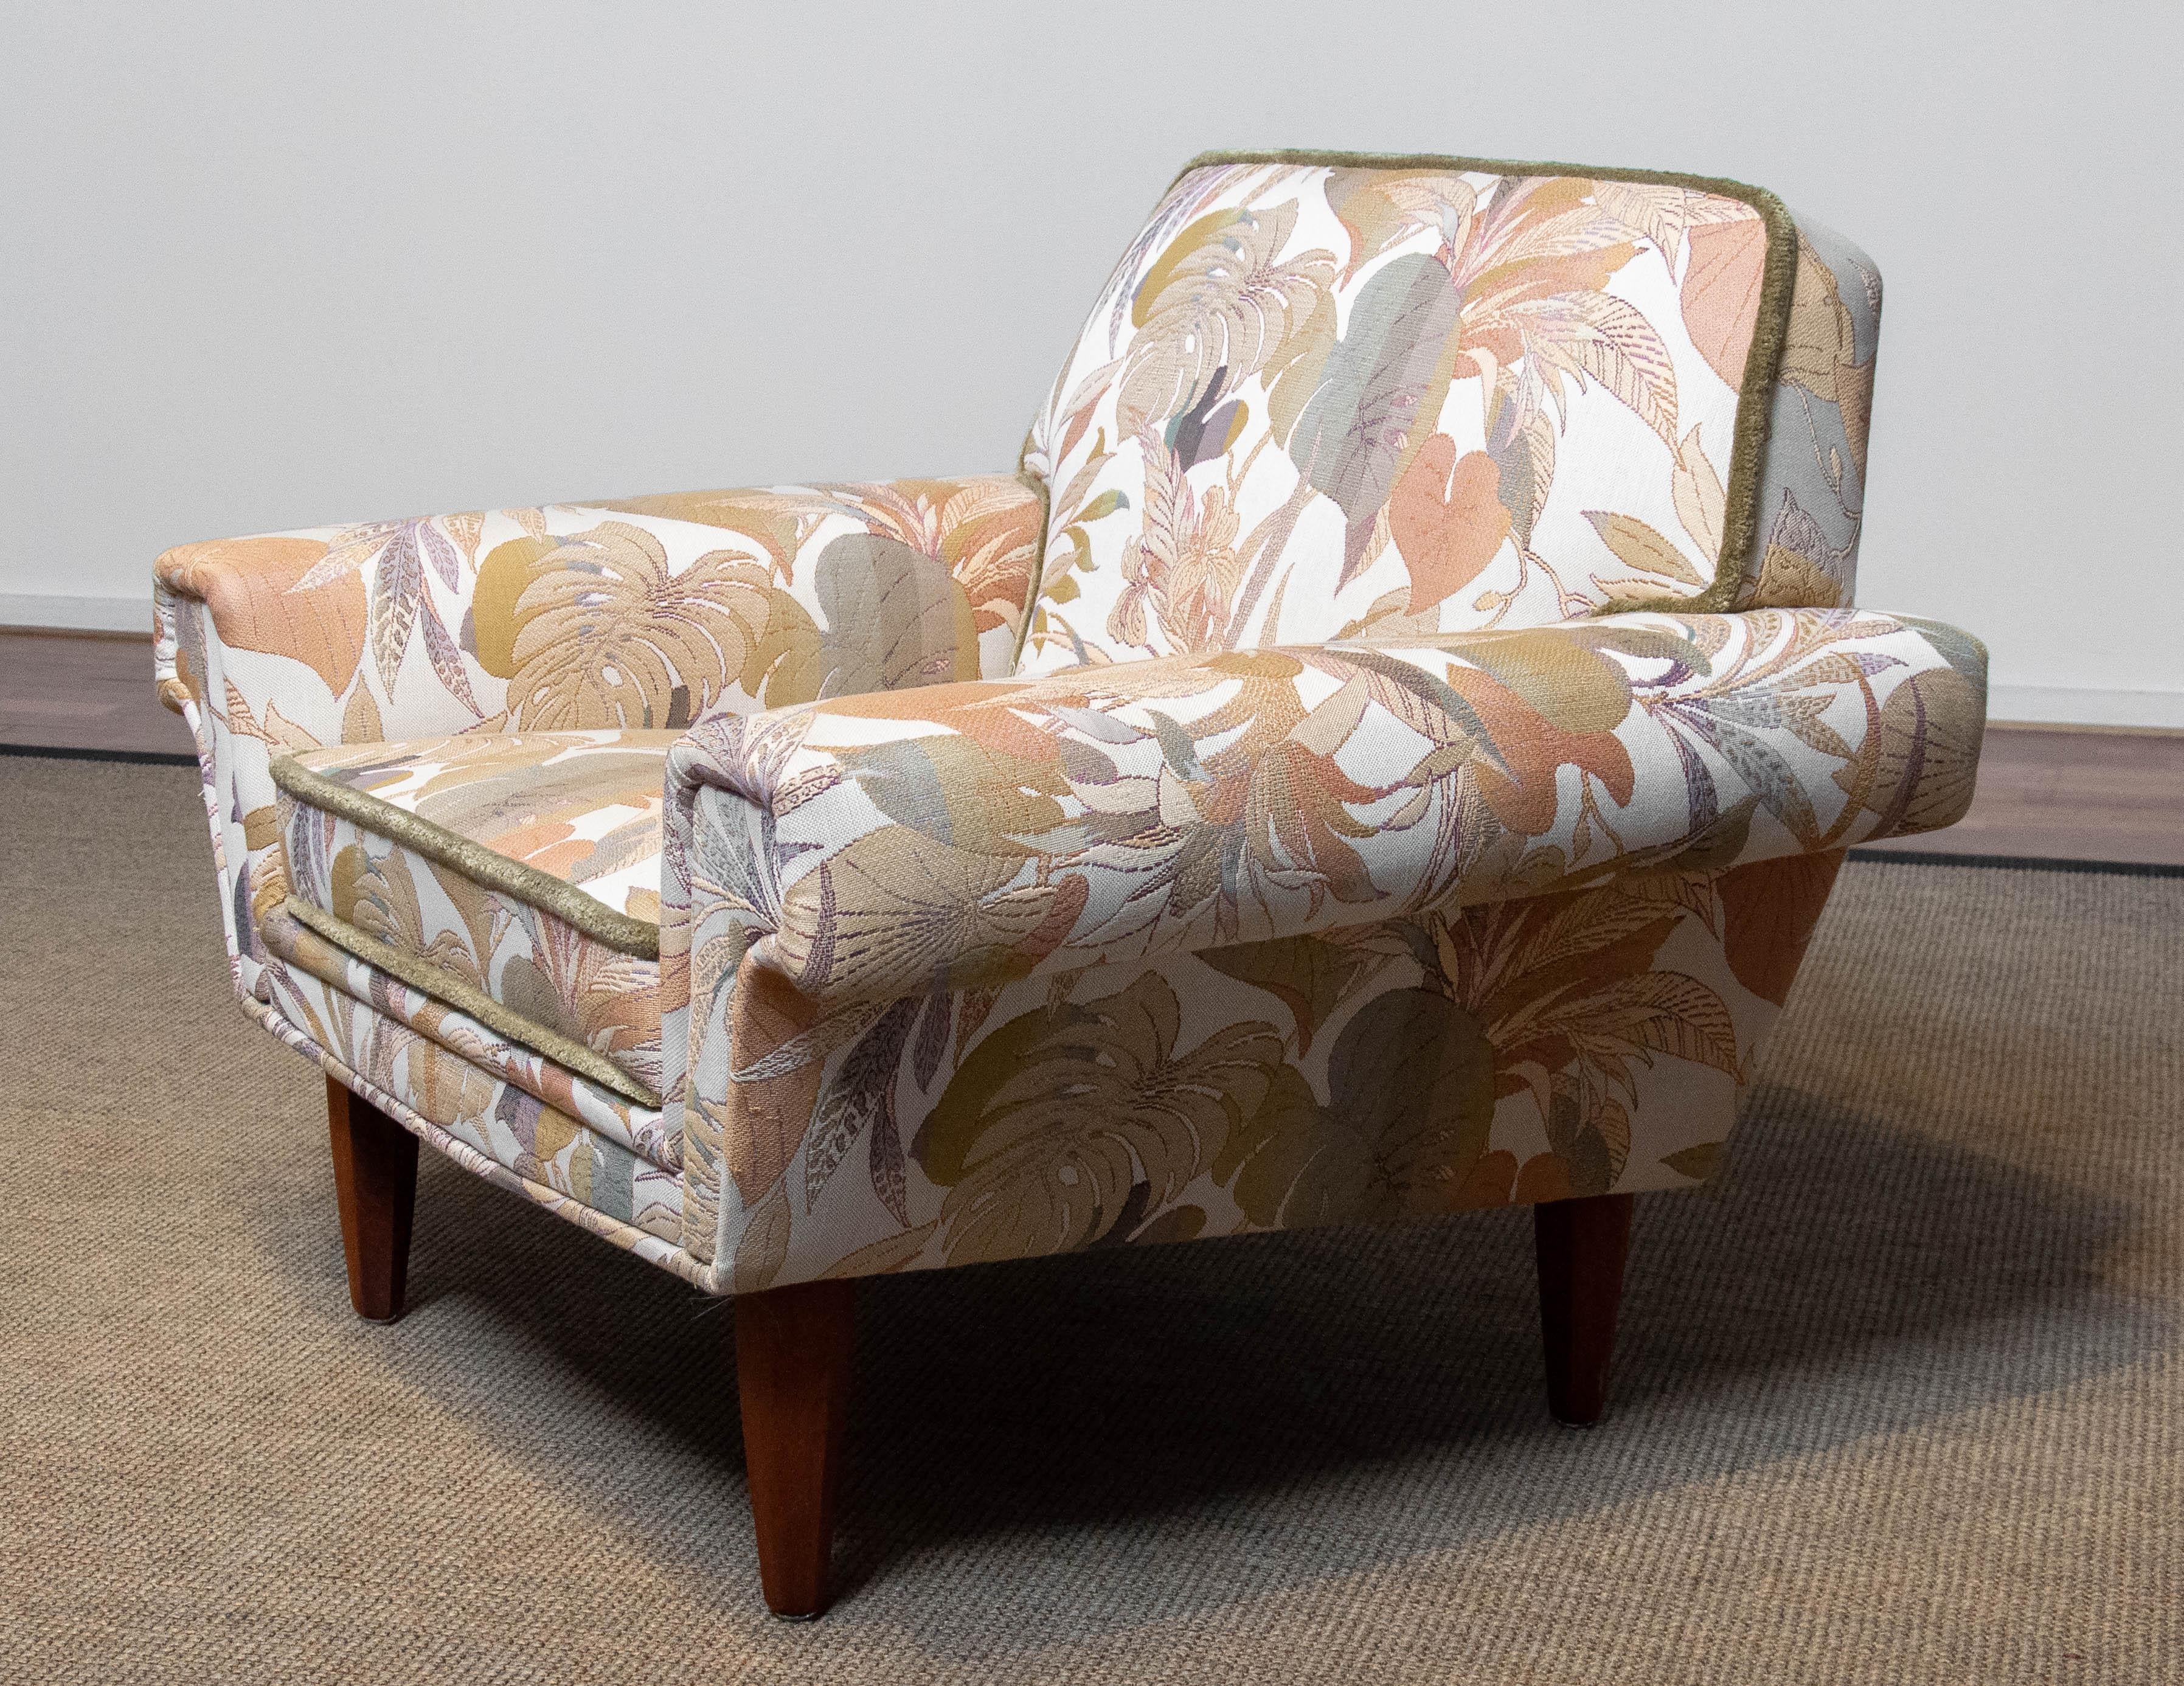 Hollywood Regency Danish Low Back Lounge Chair Upholstered Floral Jacquard Fabric from the 1970's For Sale